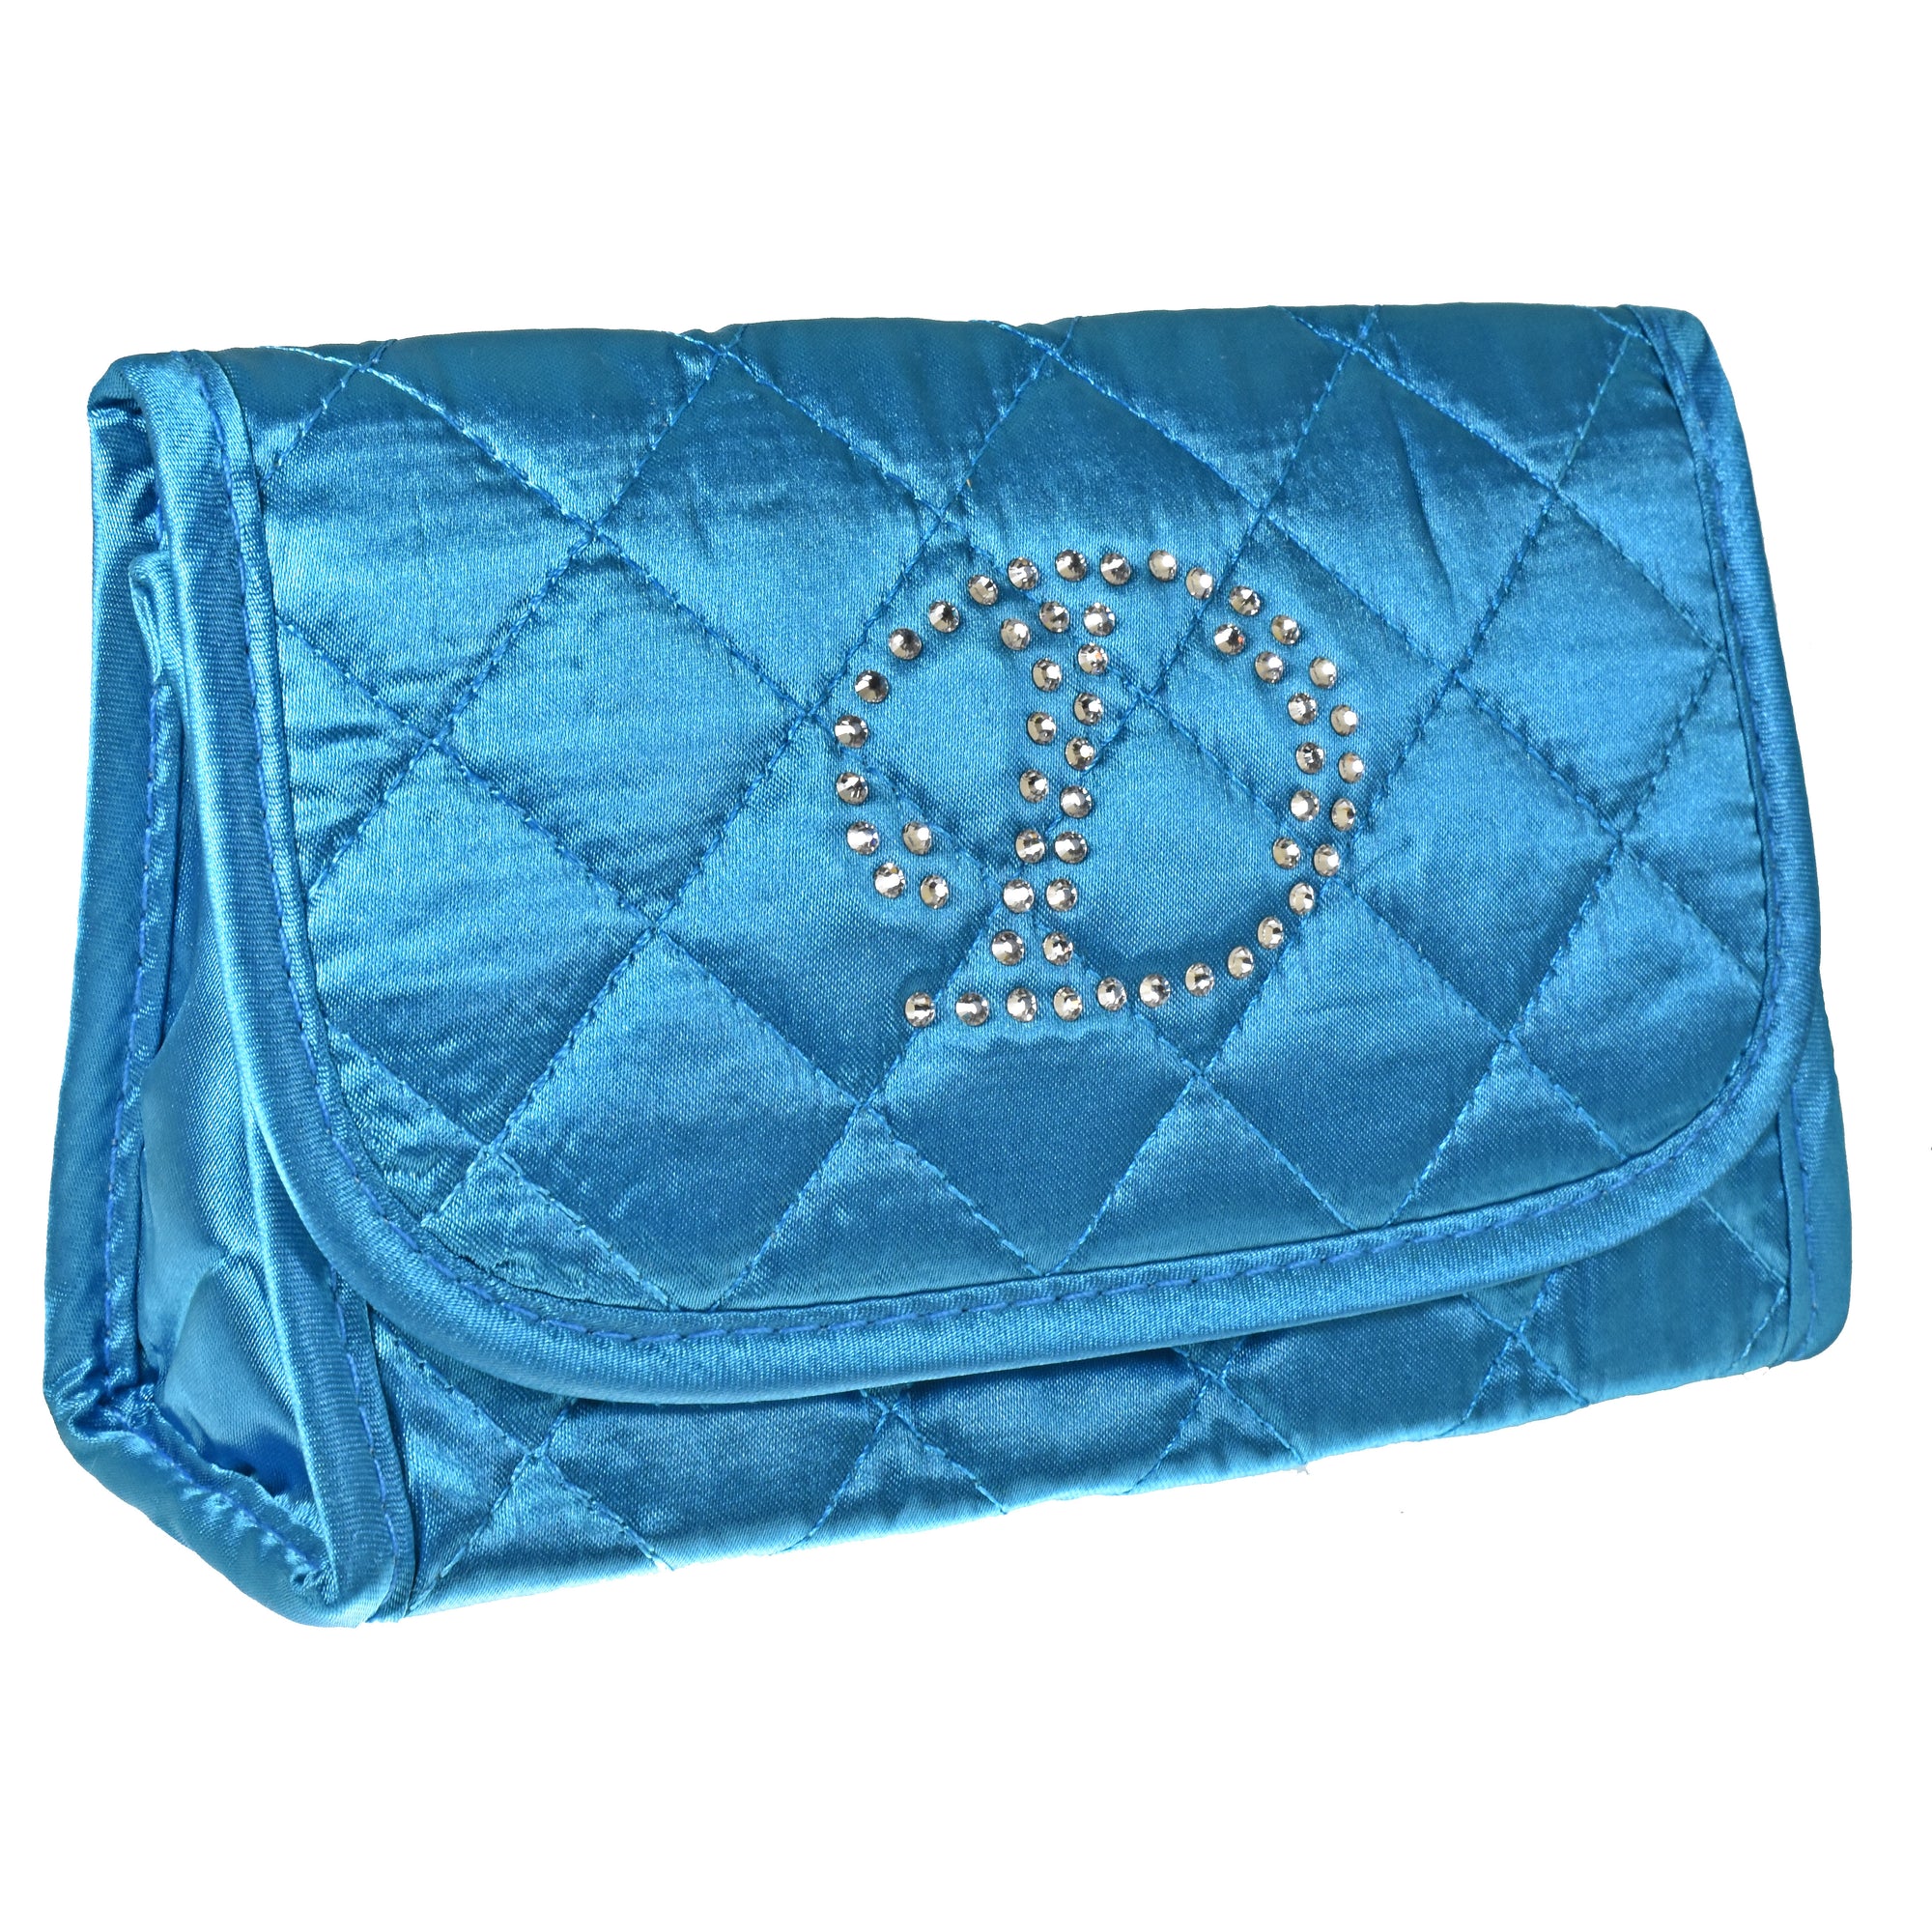 Personalized & Monogrammed Cosmetic Bag with a Mirror, Quilted Turquoise-Teal Satin, Cursive Single Upper Case Letter in Swarovski Rhinestones